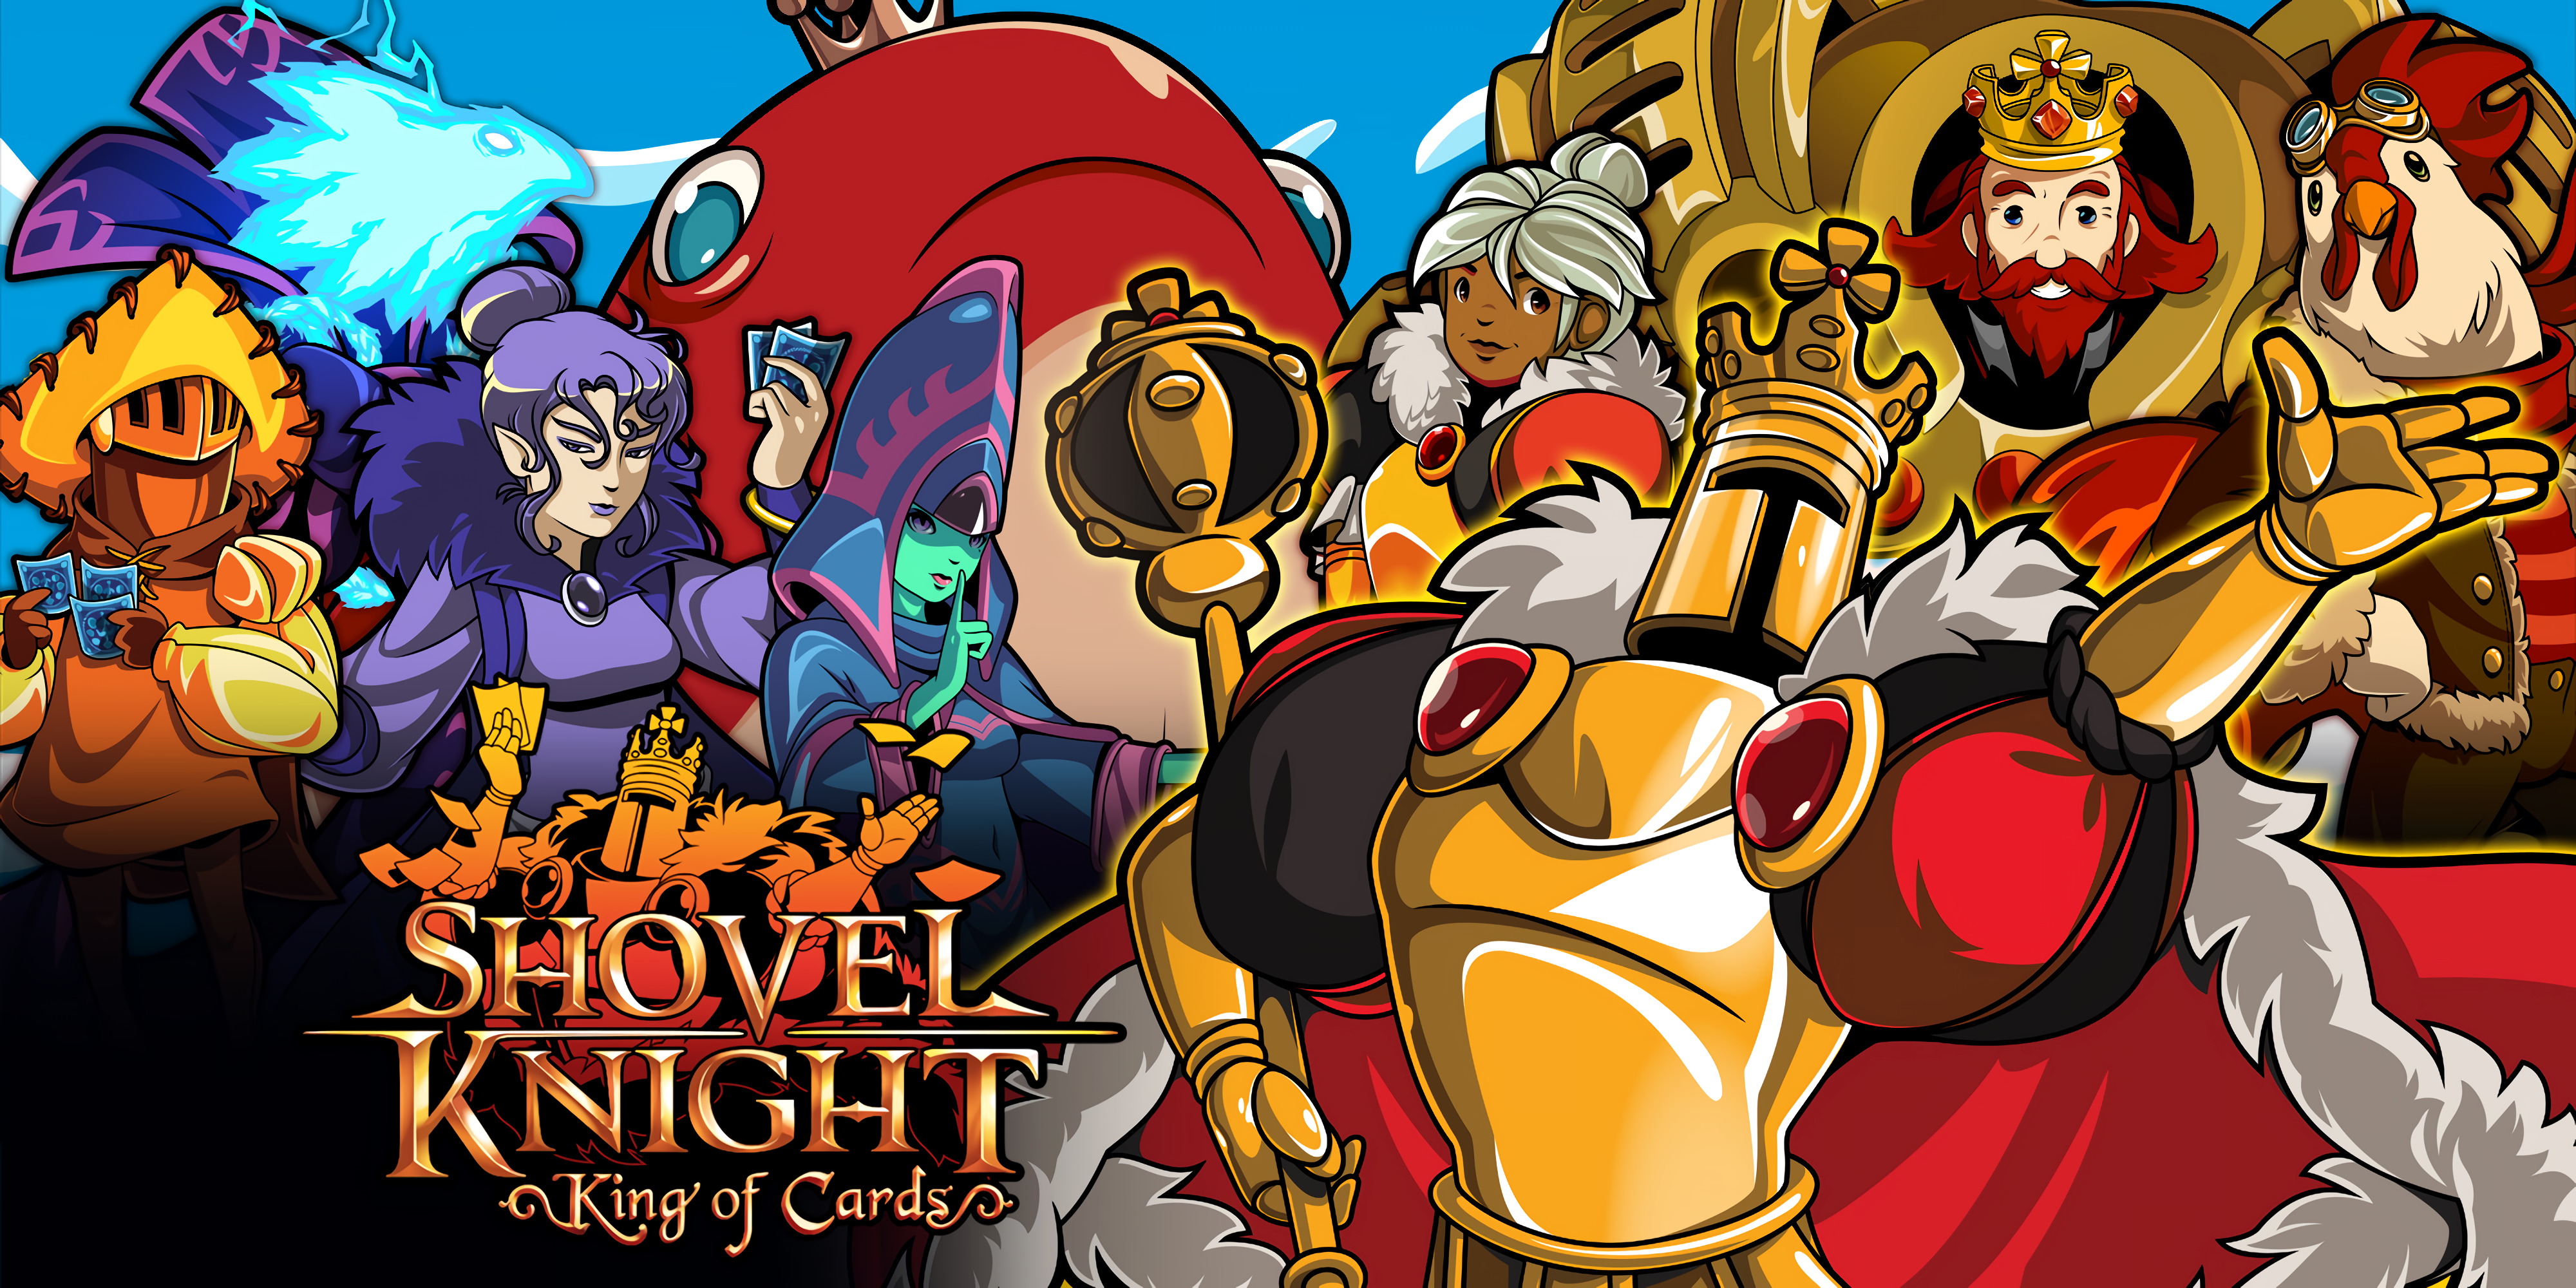 Bard Shovel Knight King Knight Shovel Knight Shovel Knight King Of Cards 4000x2000